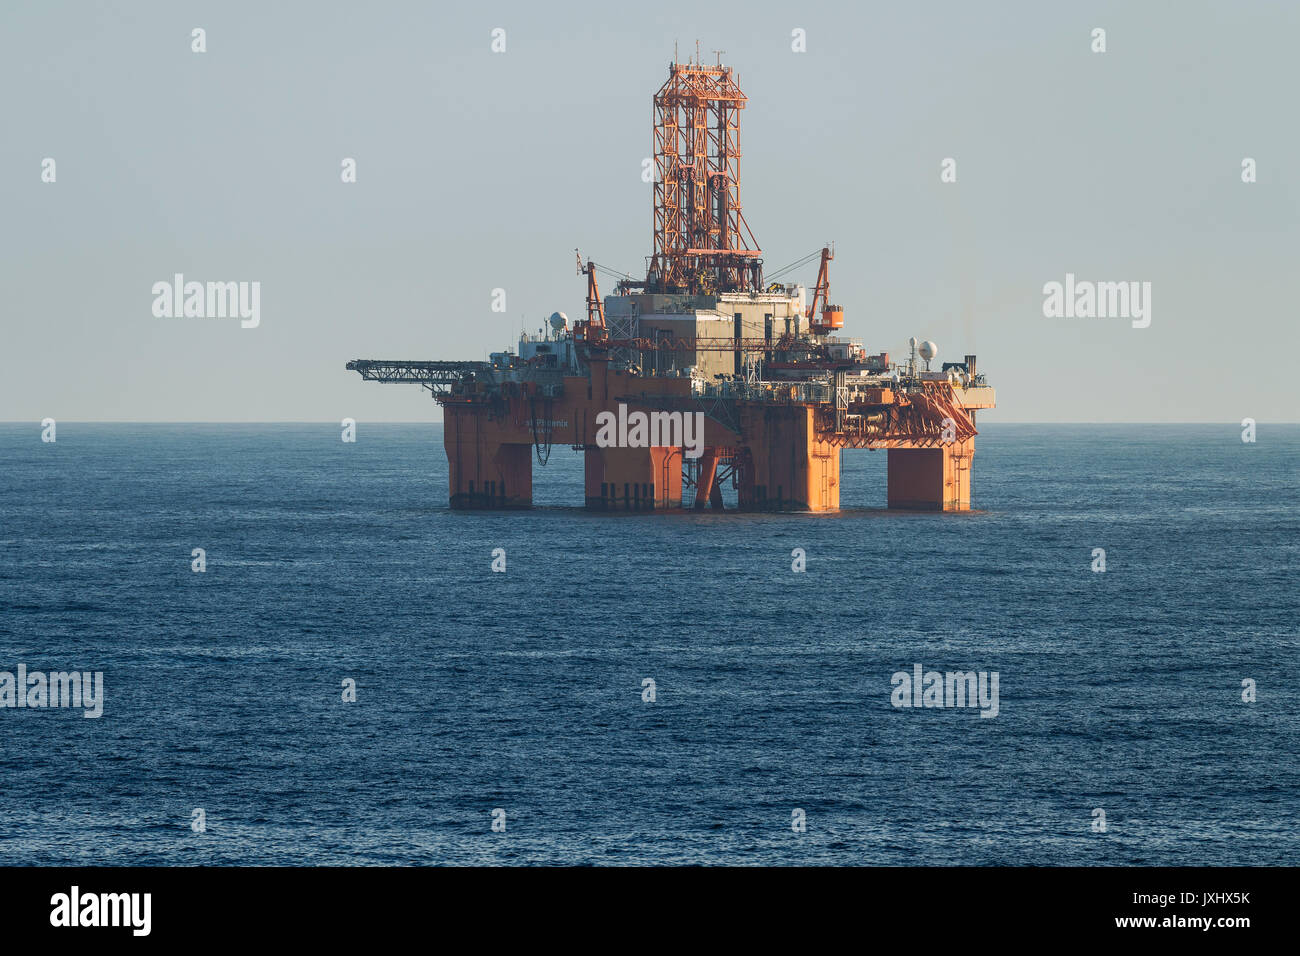 West Phoenix oil rig, oil extraction, North Sea Stock Photo